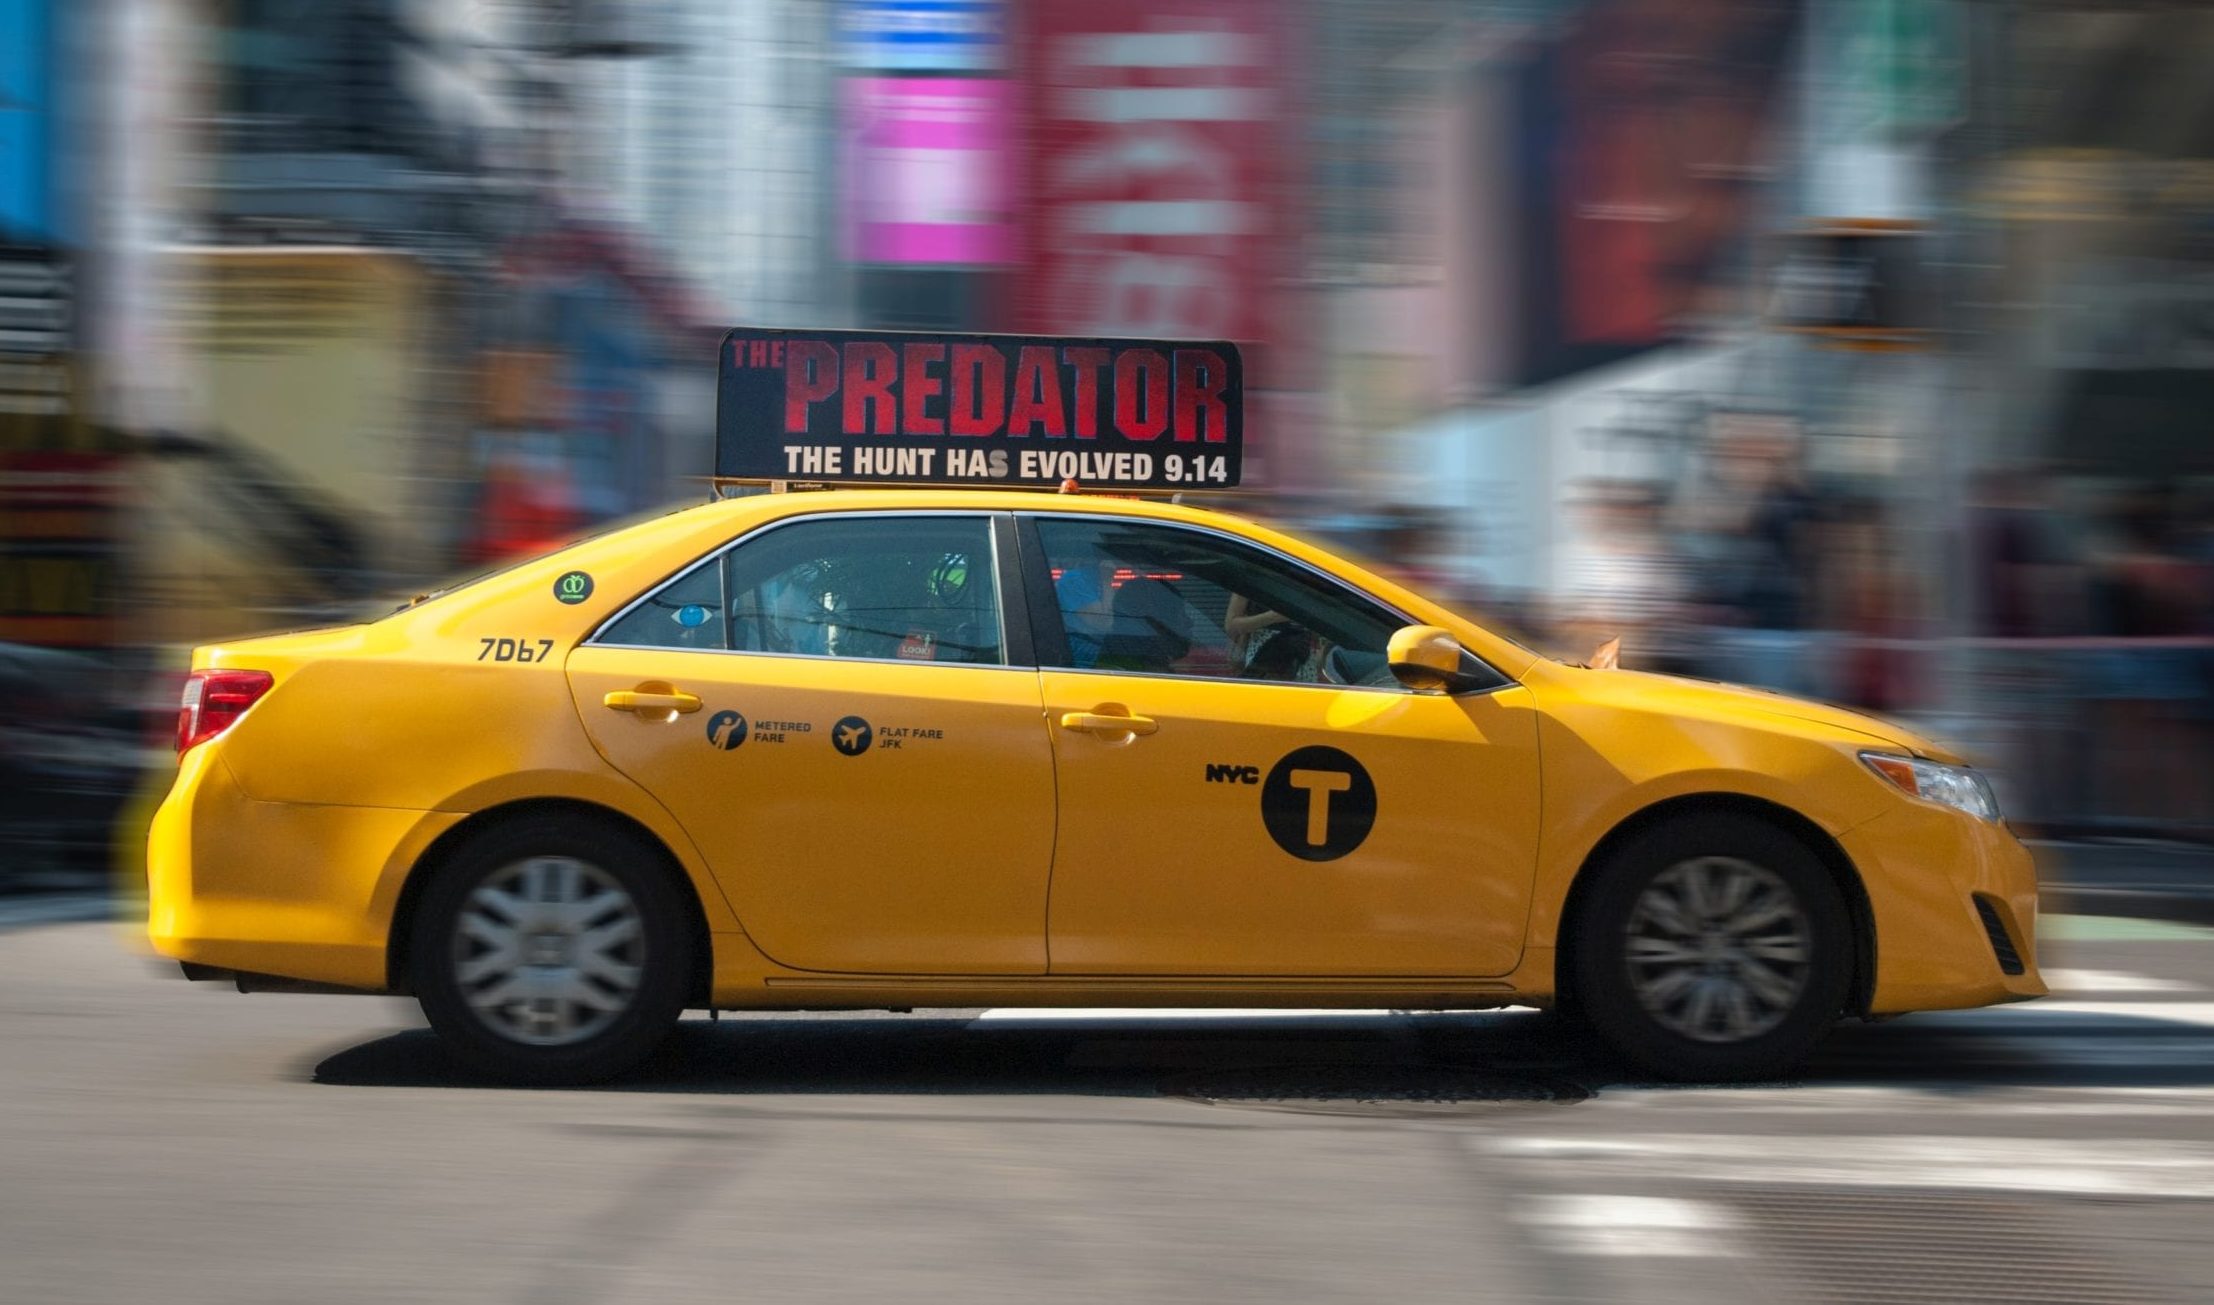 Taxis New York Prices And Information About Taxis In New York